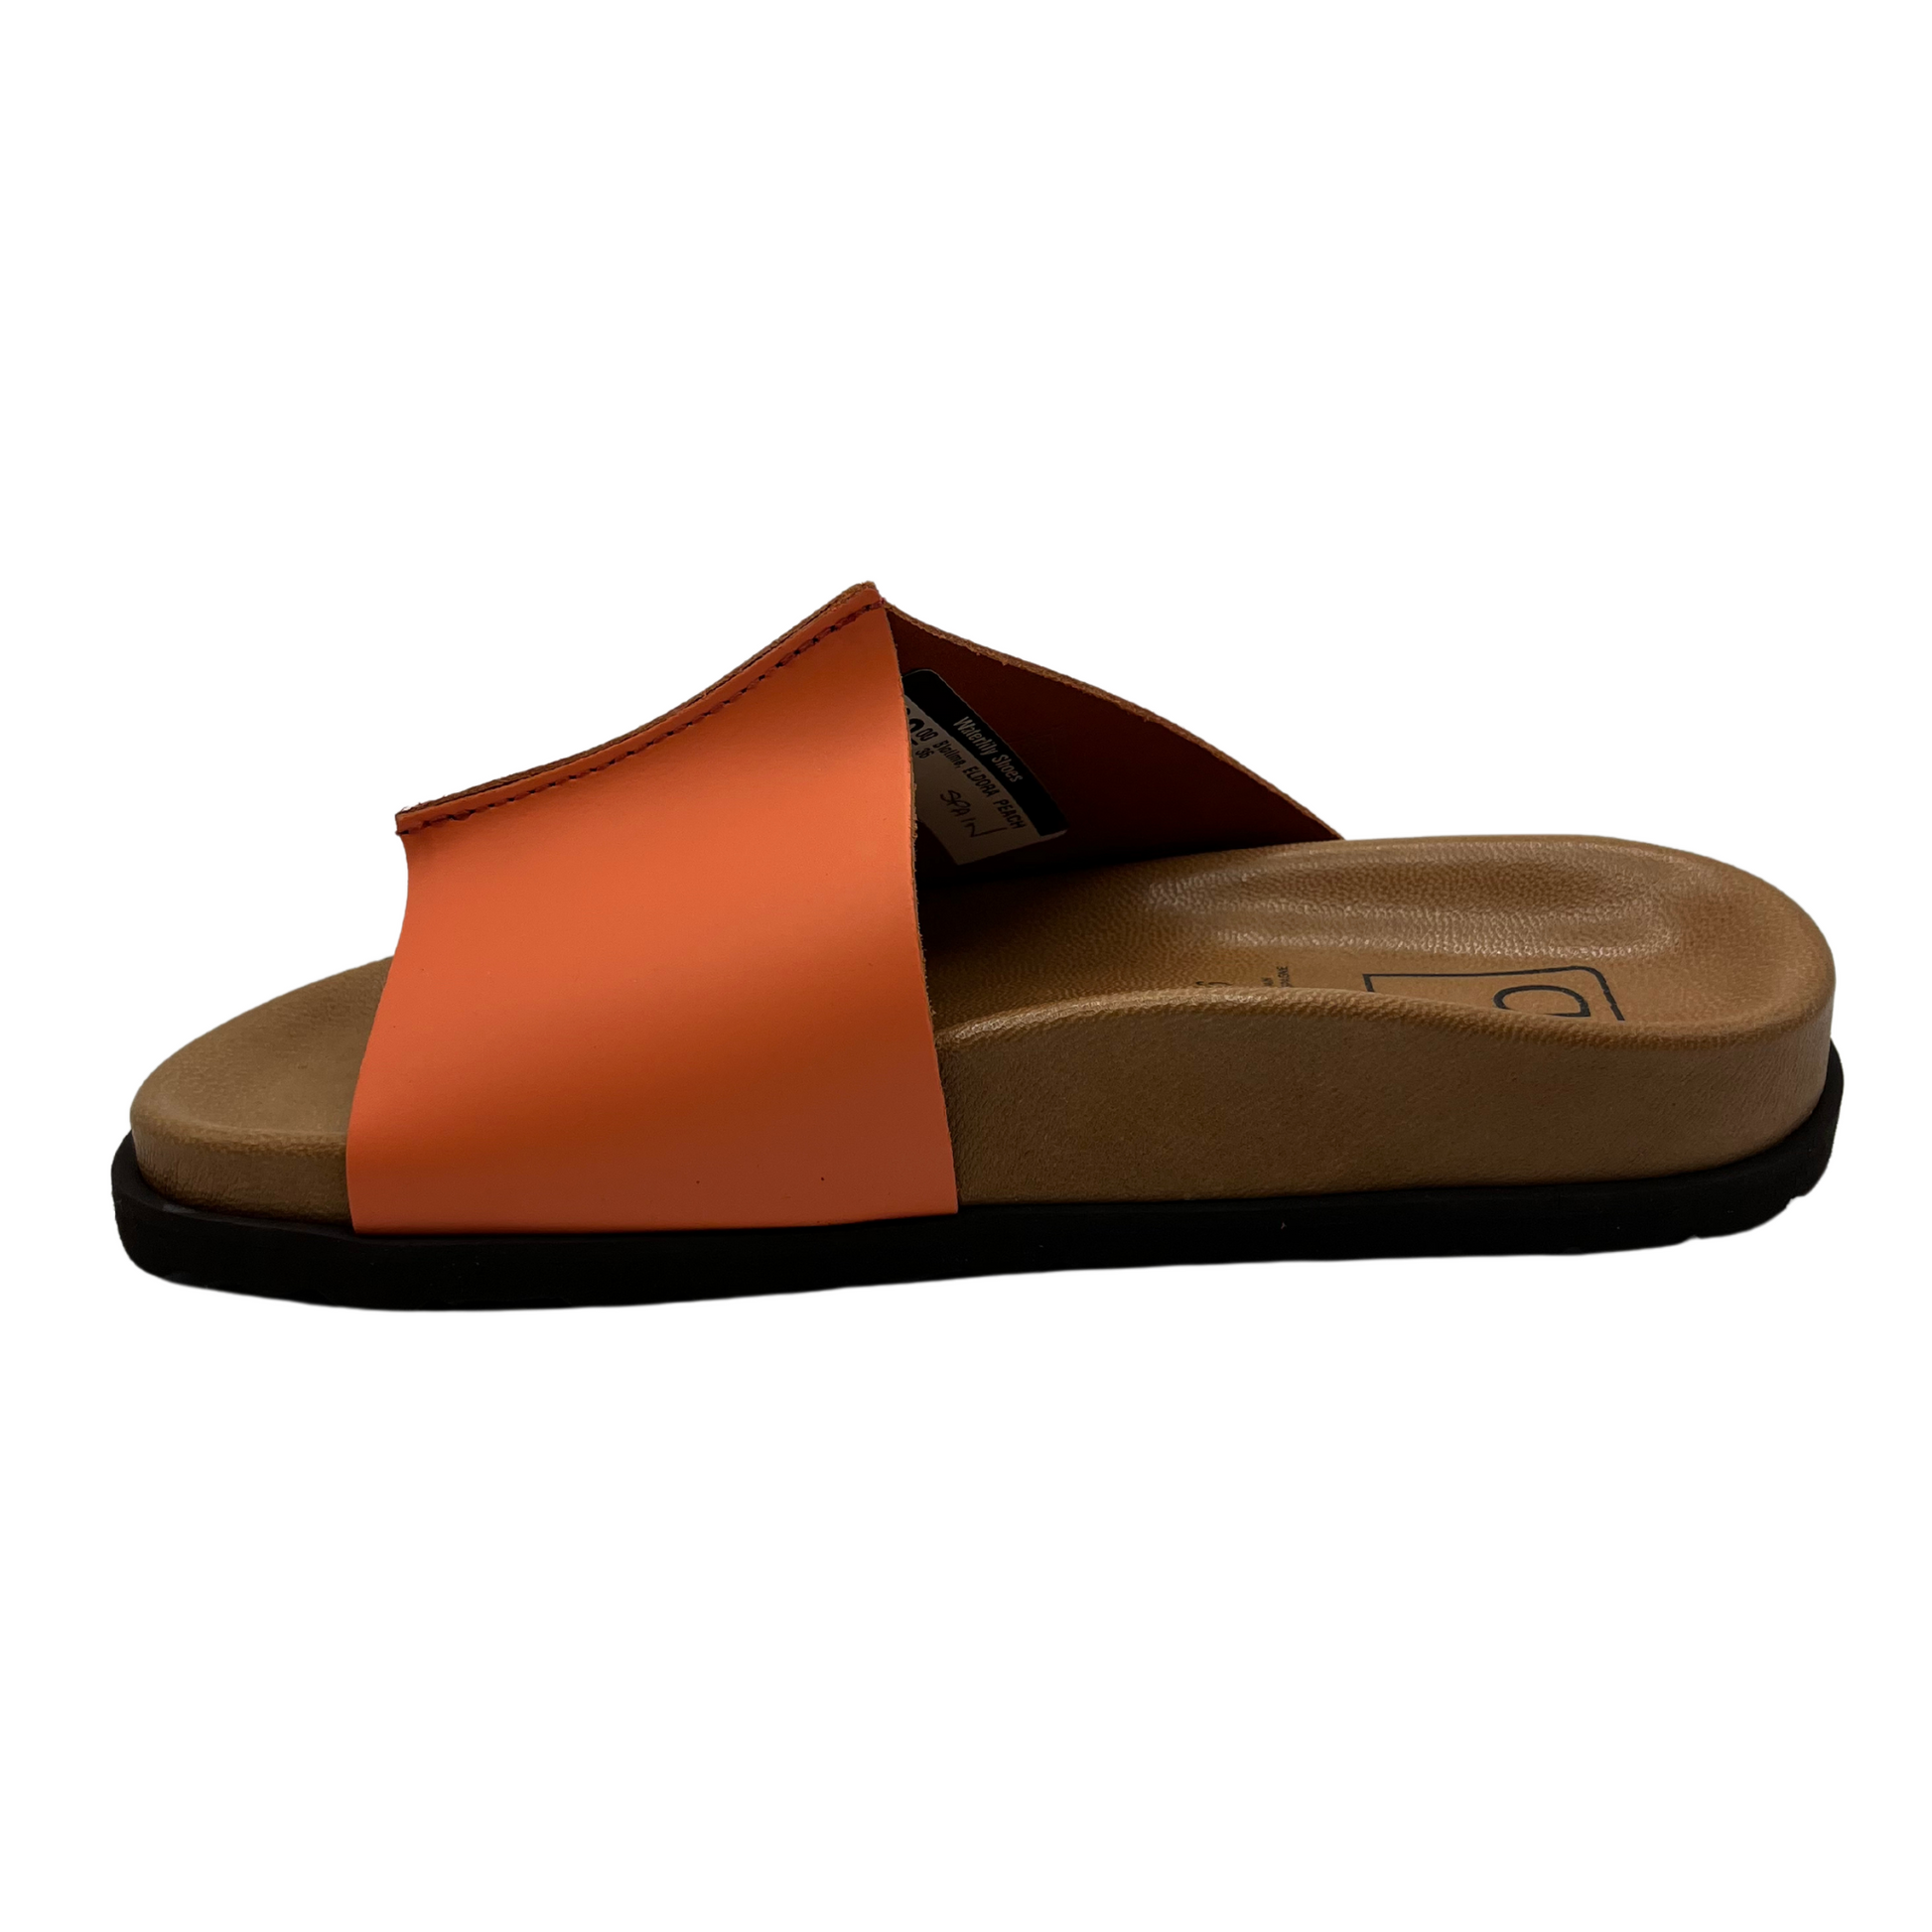 Left facing view of peach leather slide on sandal with lined contoured footbed